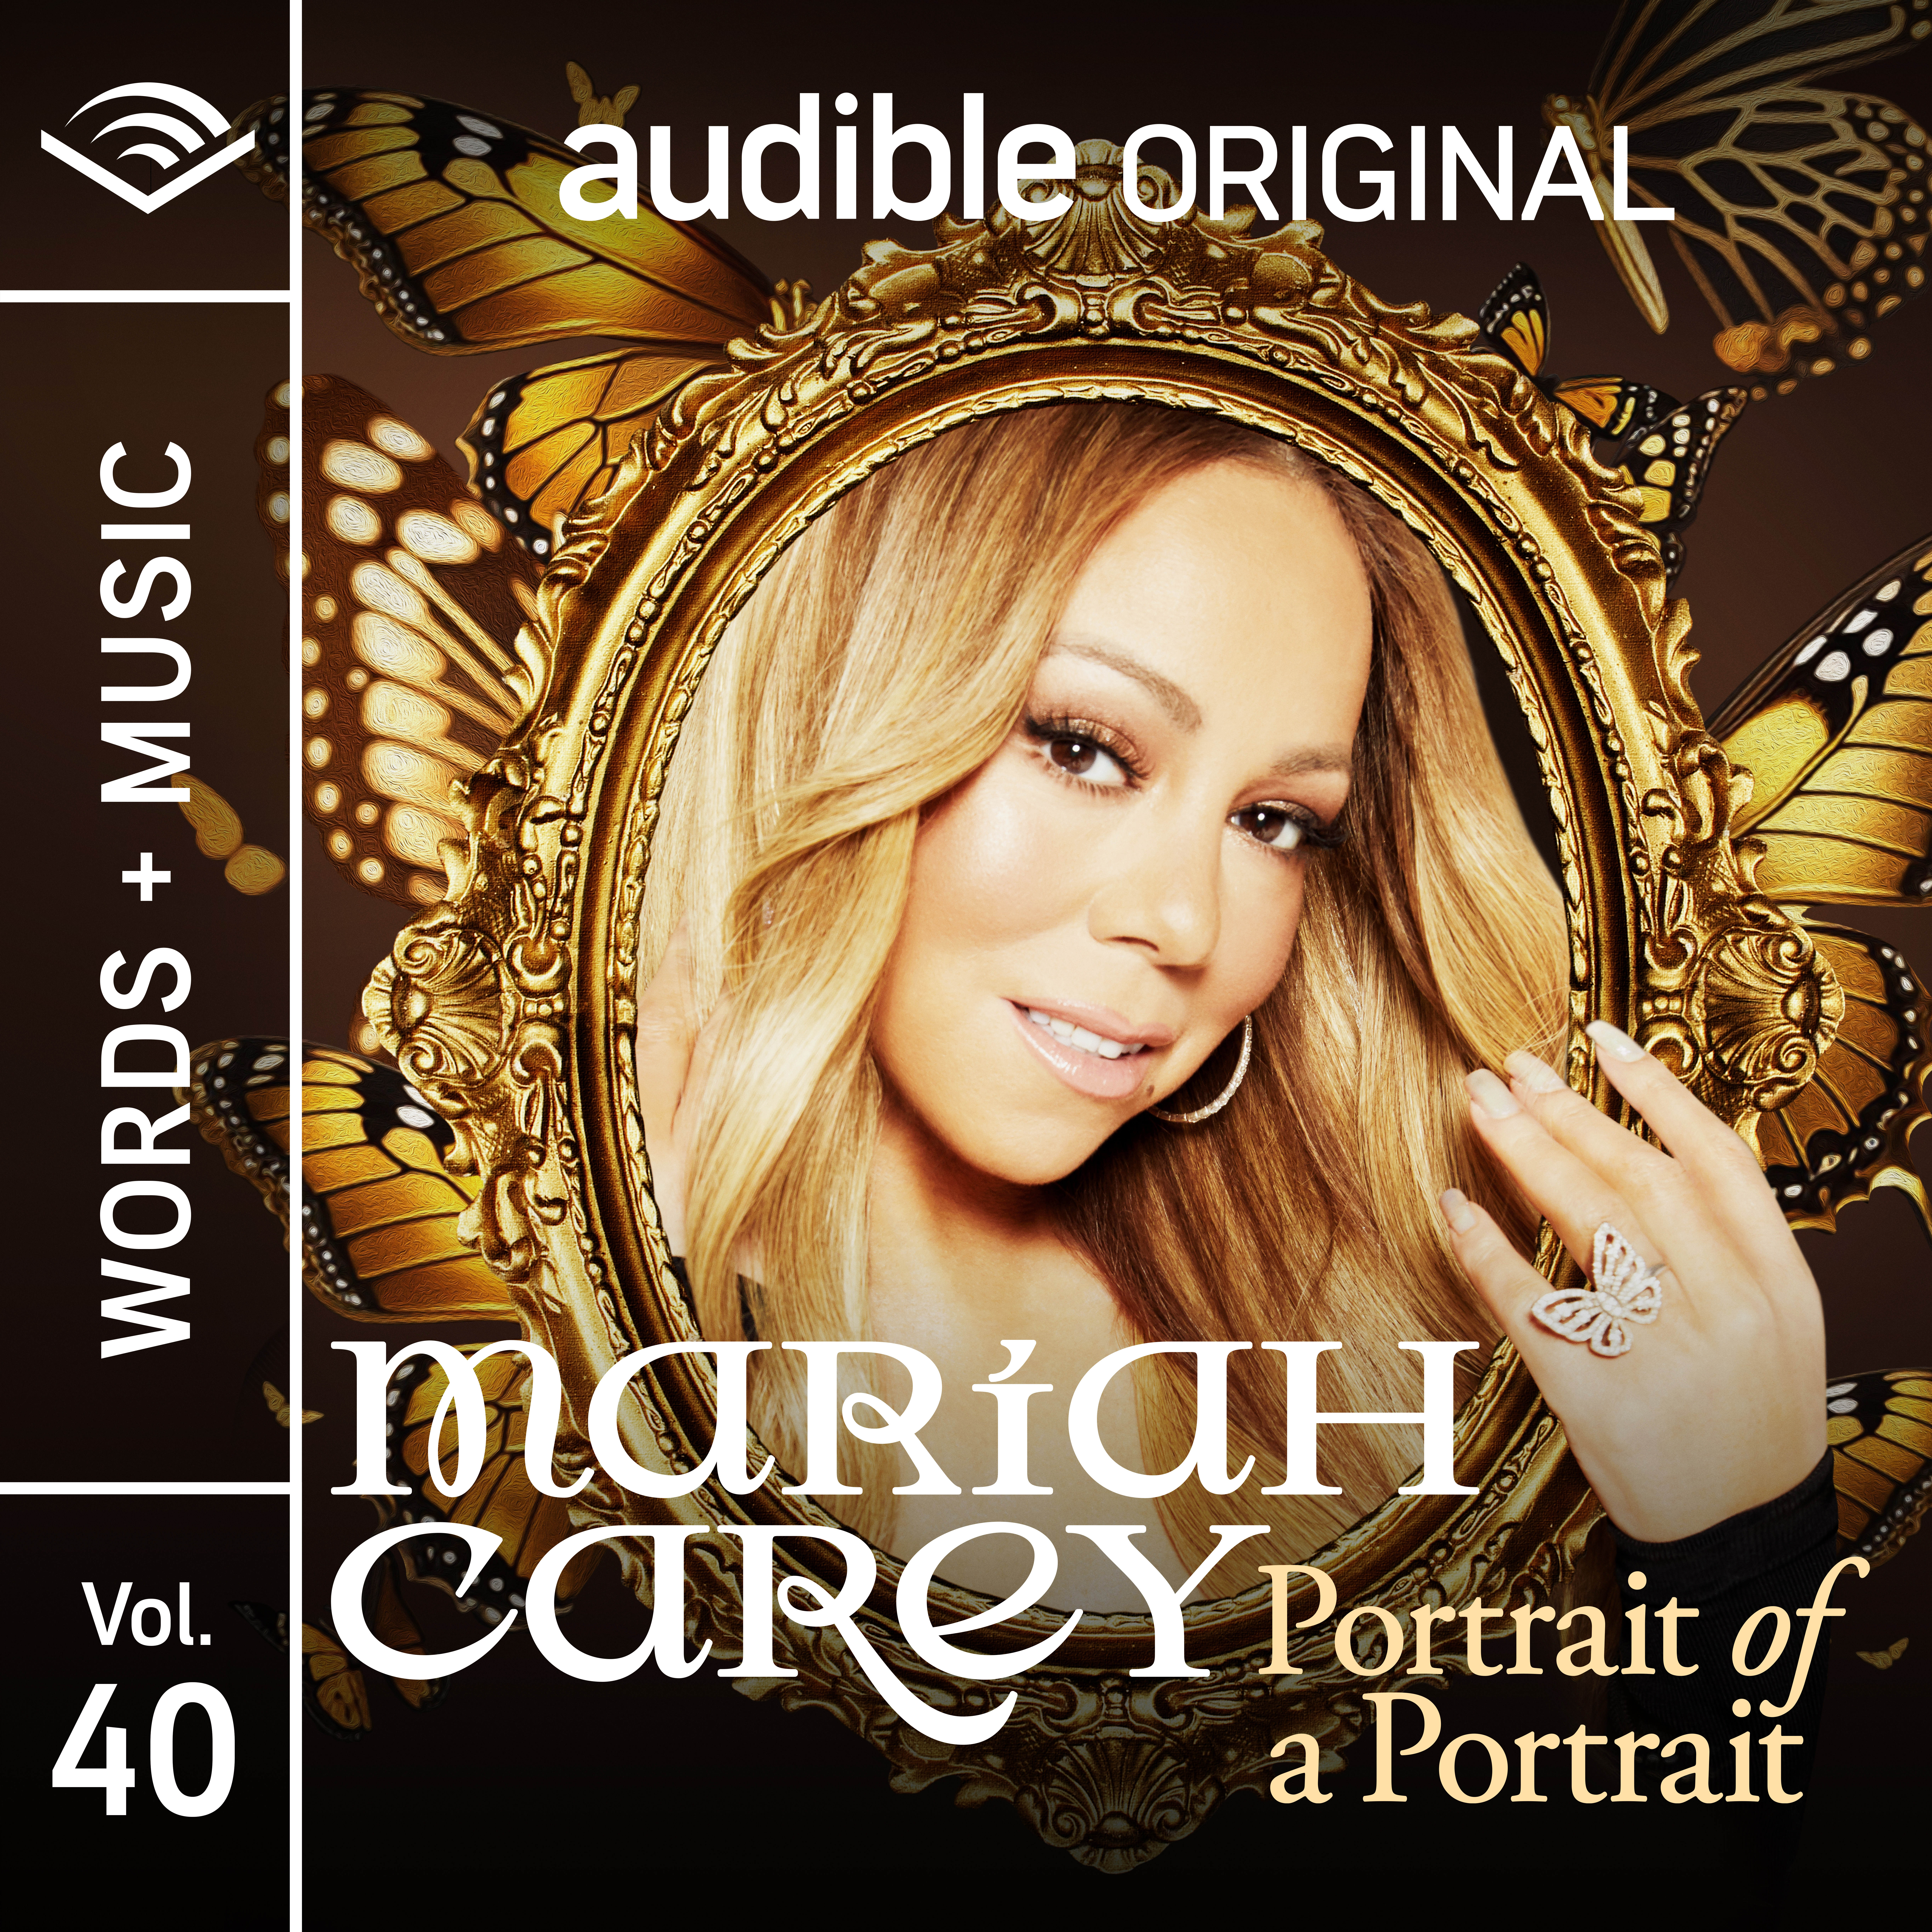 Audible original cover featuring Mariah Carey for Words + Music vol. 40: portrait of a portrait," showcasing her smiling photo with decorative golden elements.